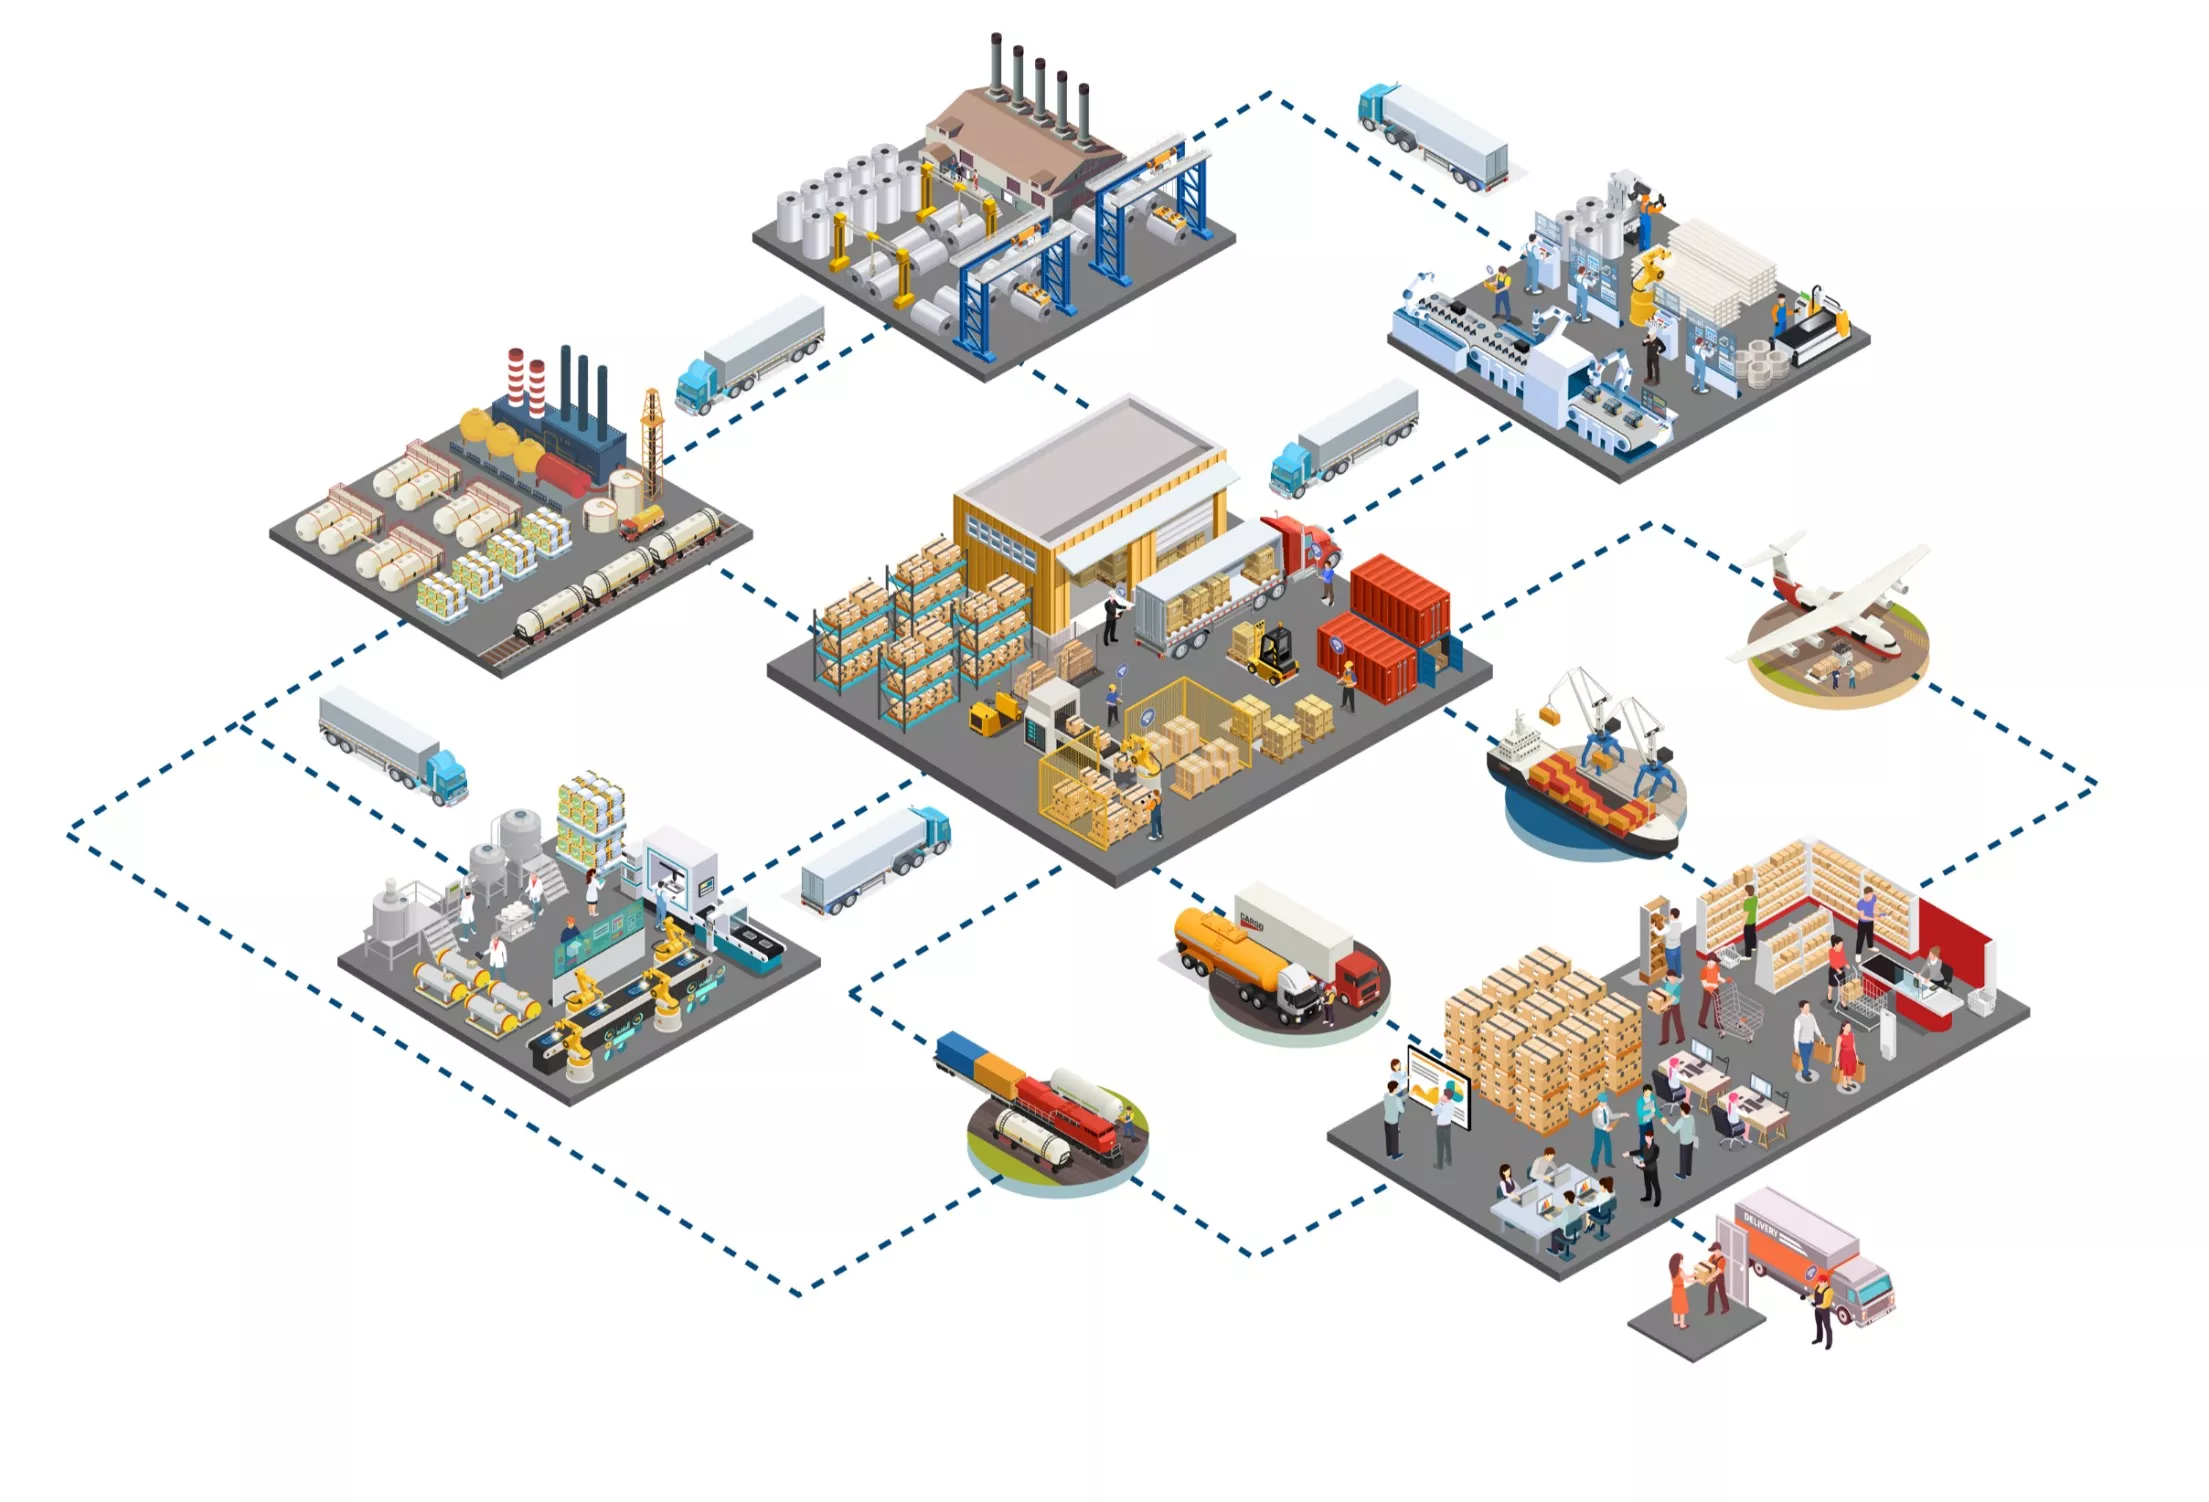 What is 3DEXPERIENCE VIRTUAL FACTORY?